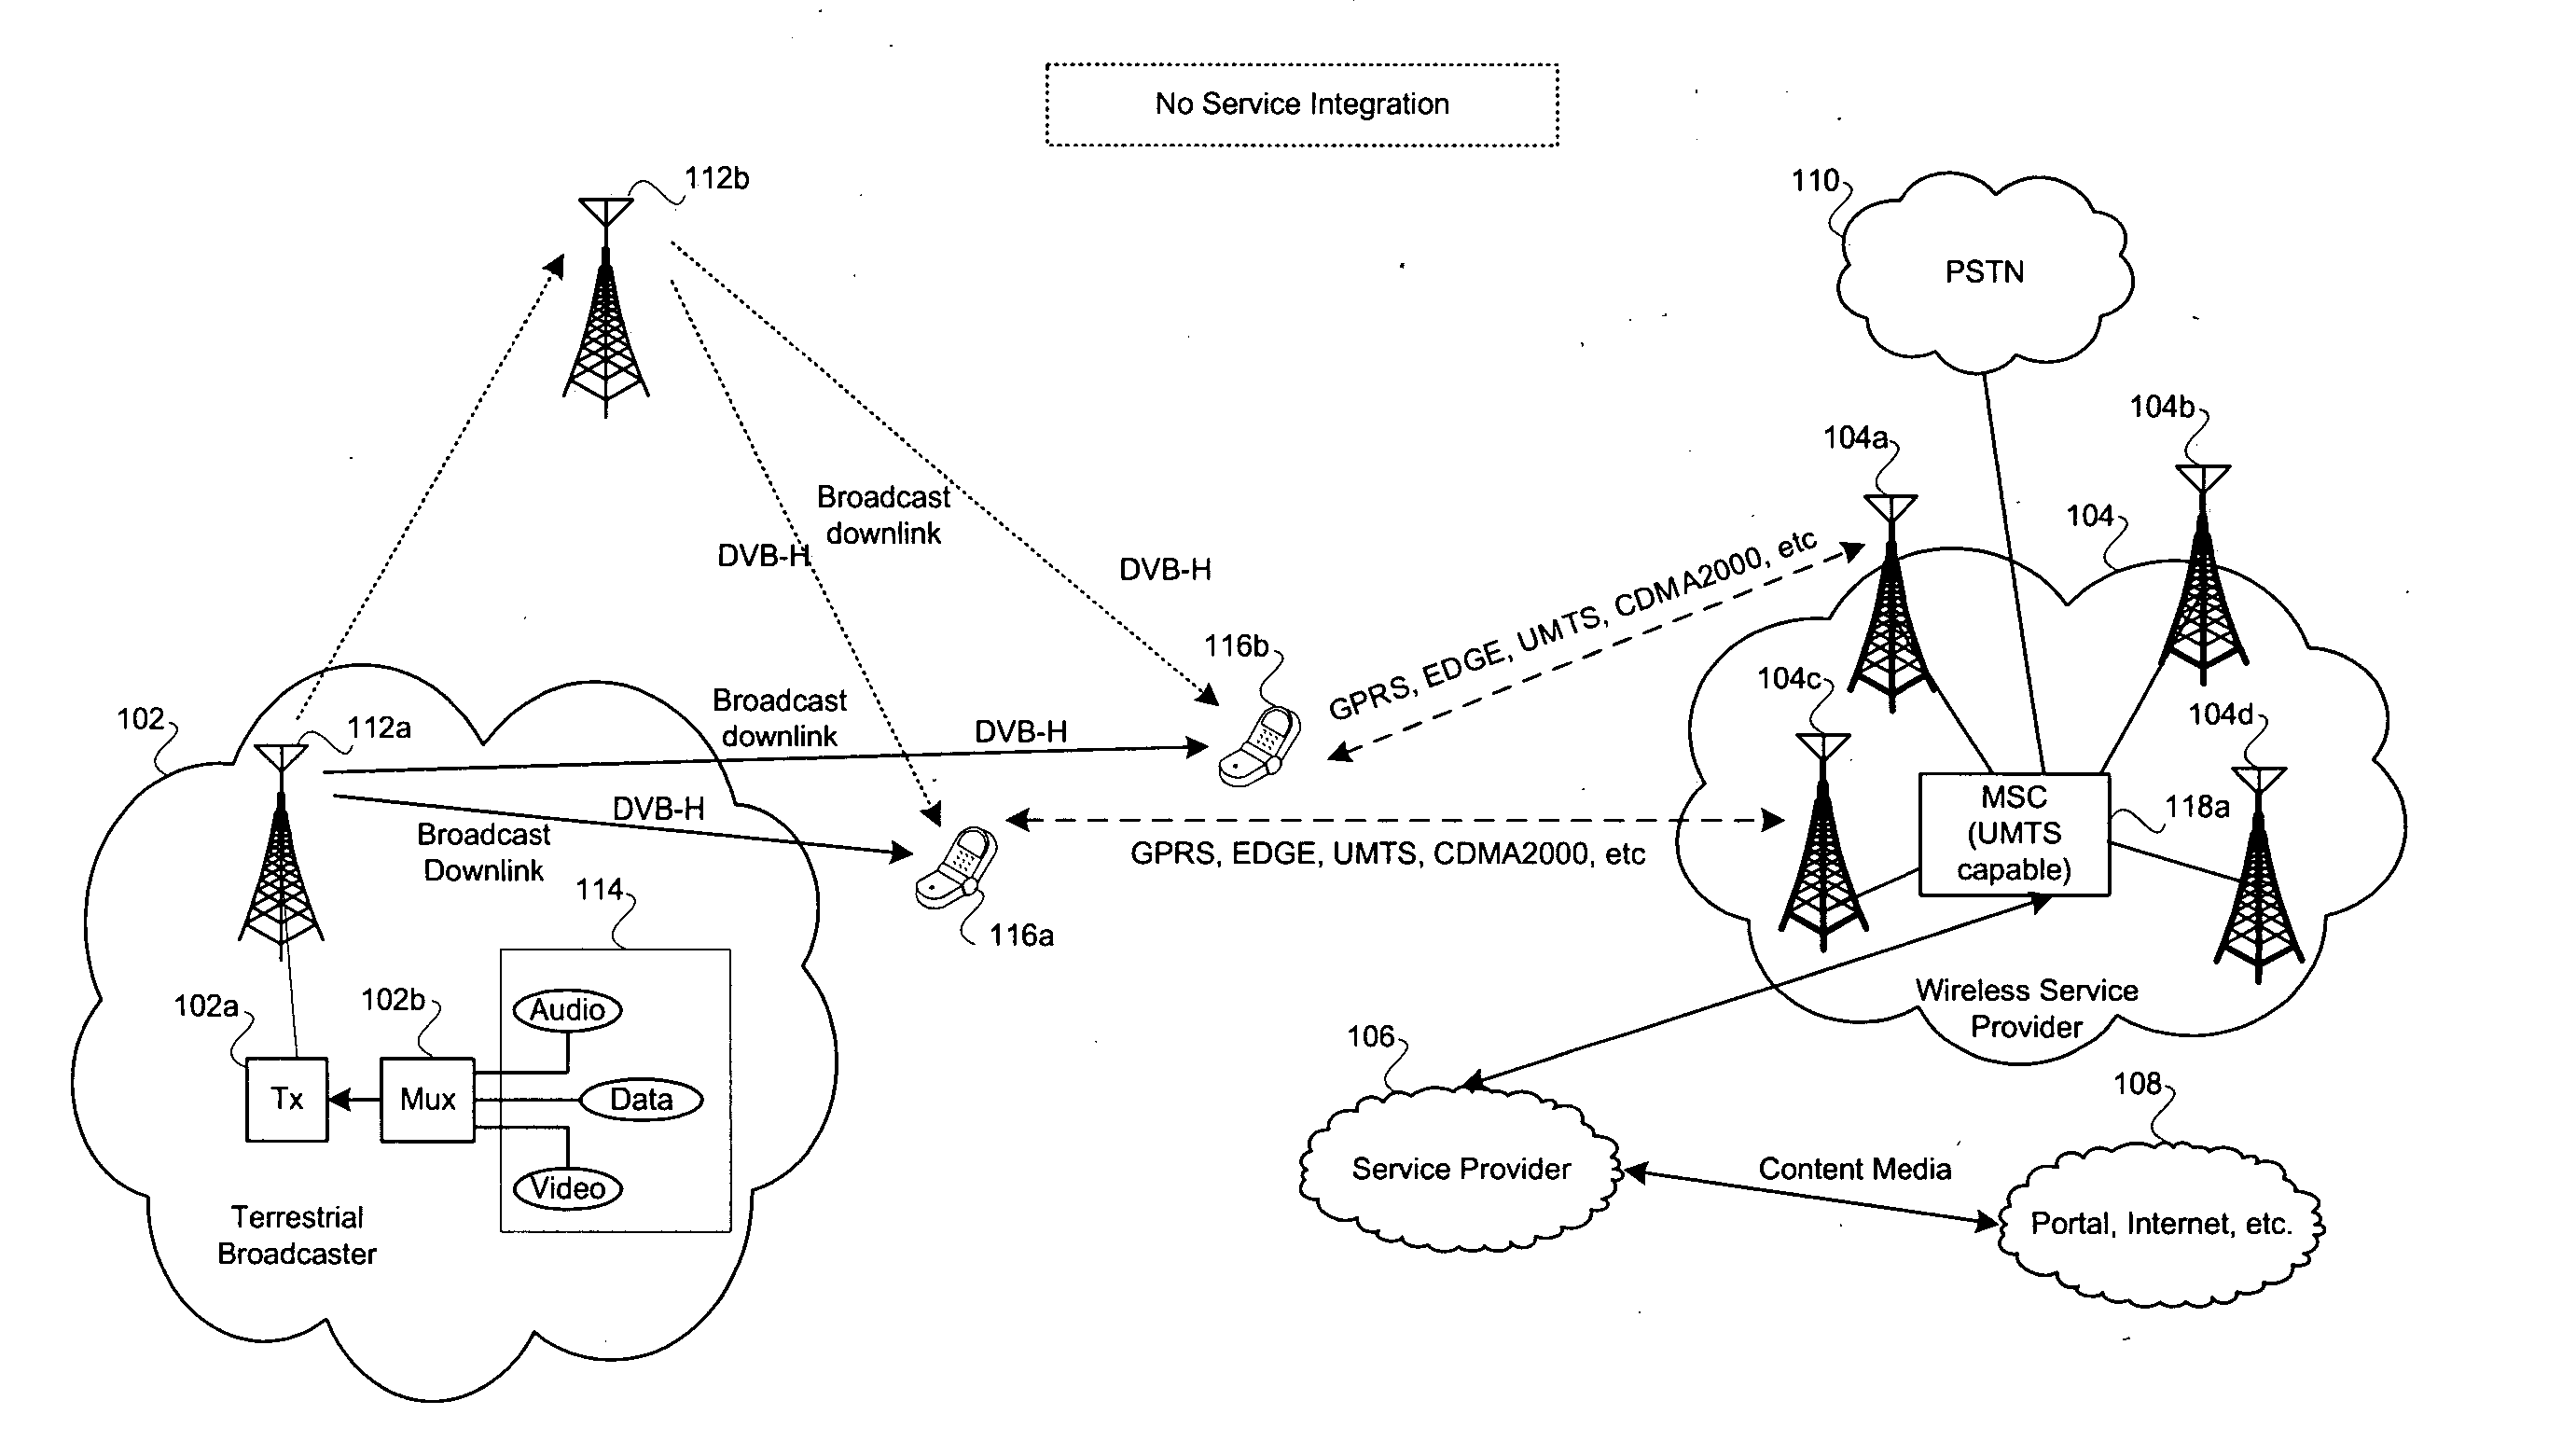 Method and system for mobile architecture supporting cellular or wireless networks and broadcast utilizing a multichip cellular and broadcast silicon solution